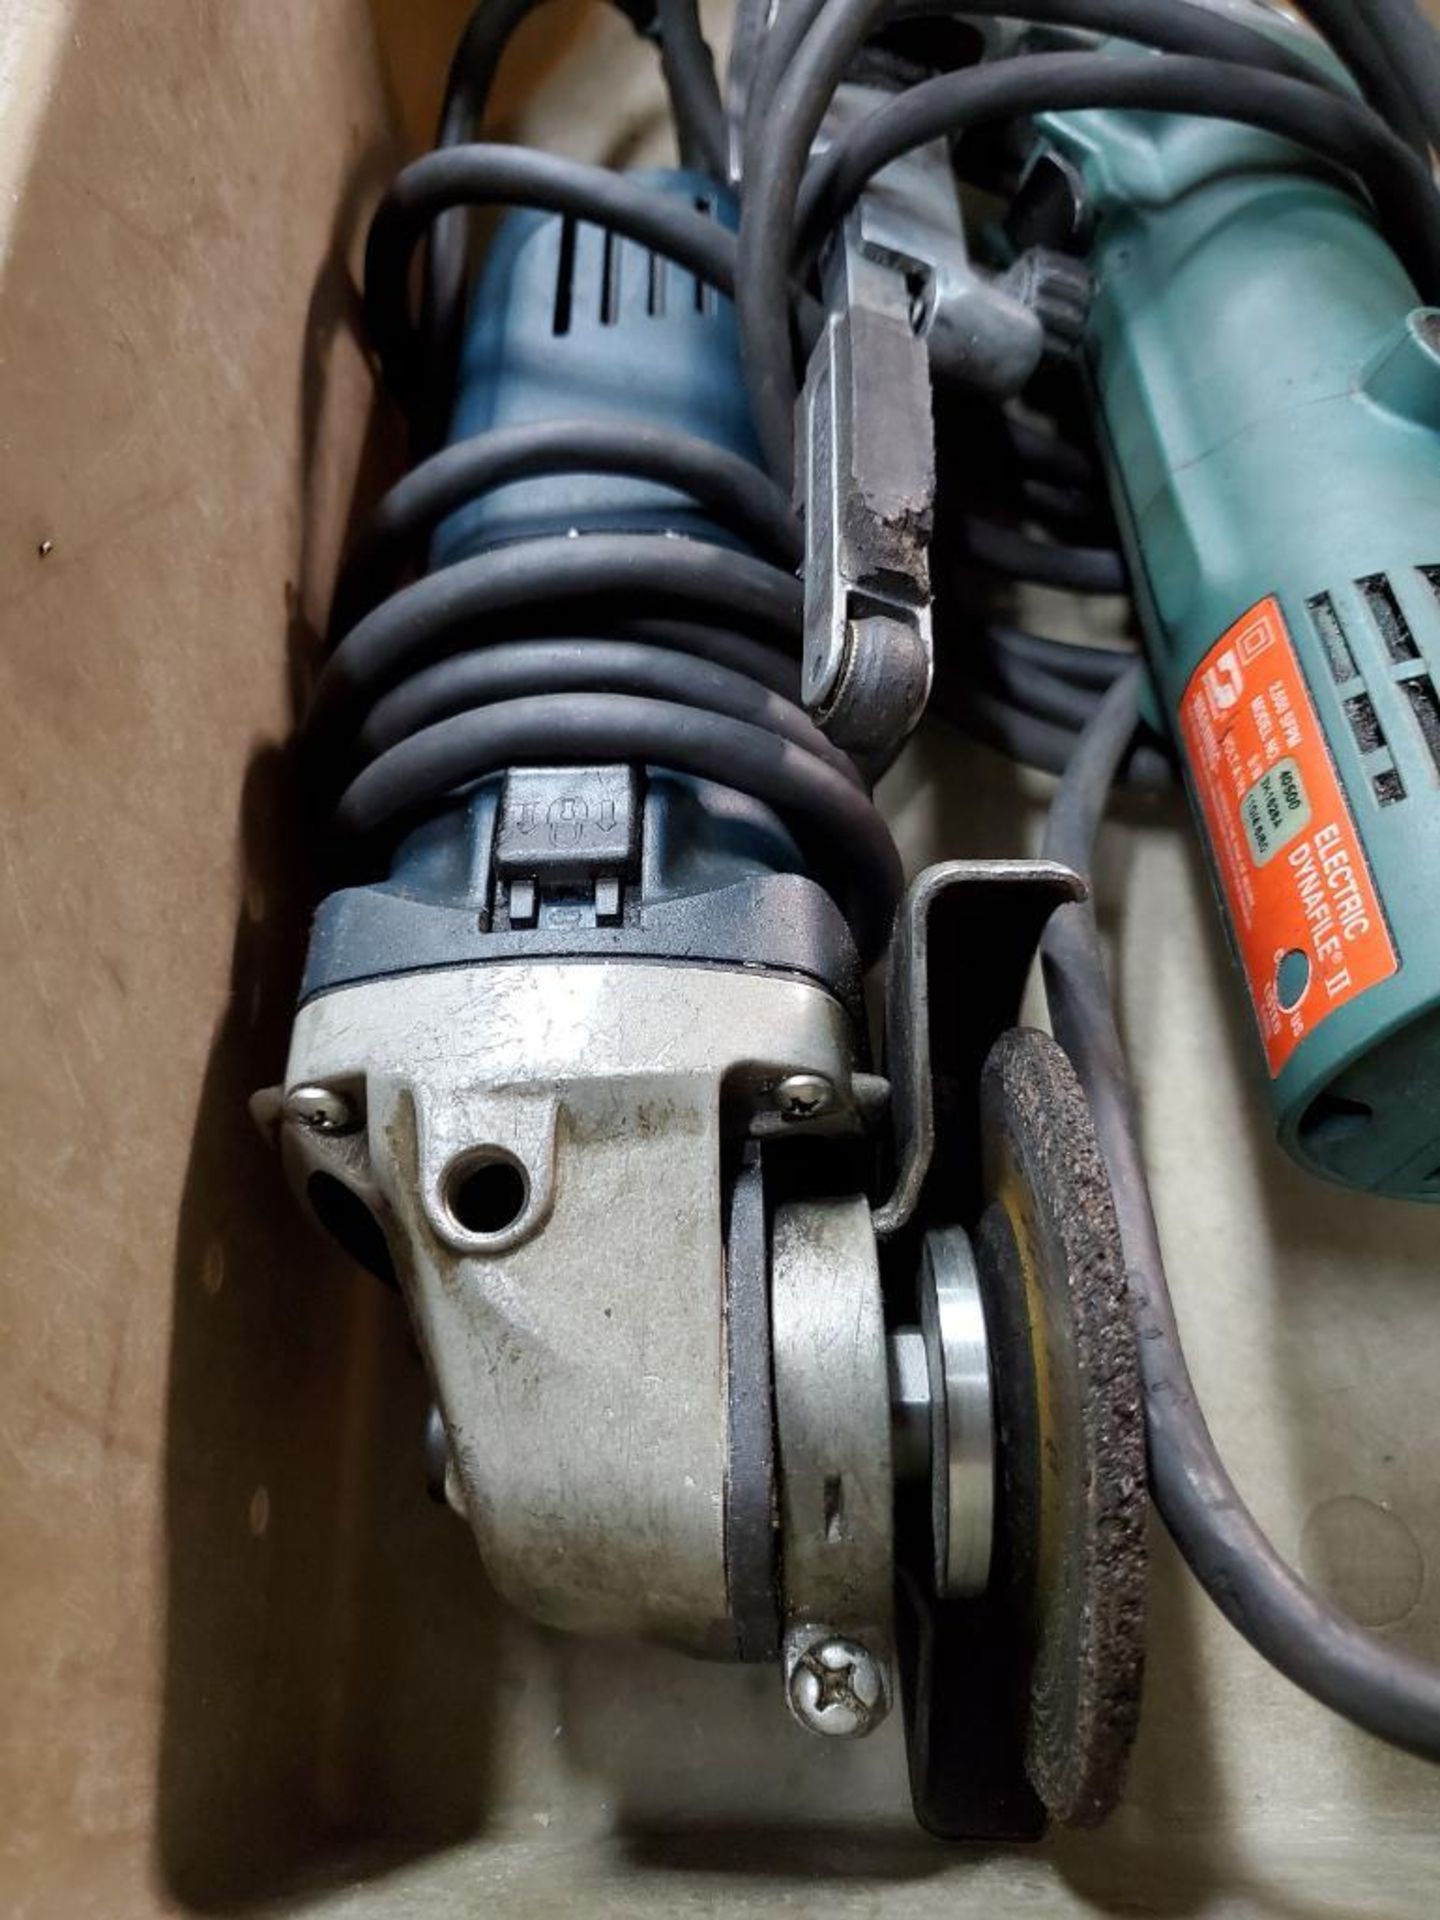 (2) ELECTRIC TOOLS DYNABRADE 11203 1'' SANDER & BOSCH RIGHT ANGLE GRINDER - Image 3 of 3